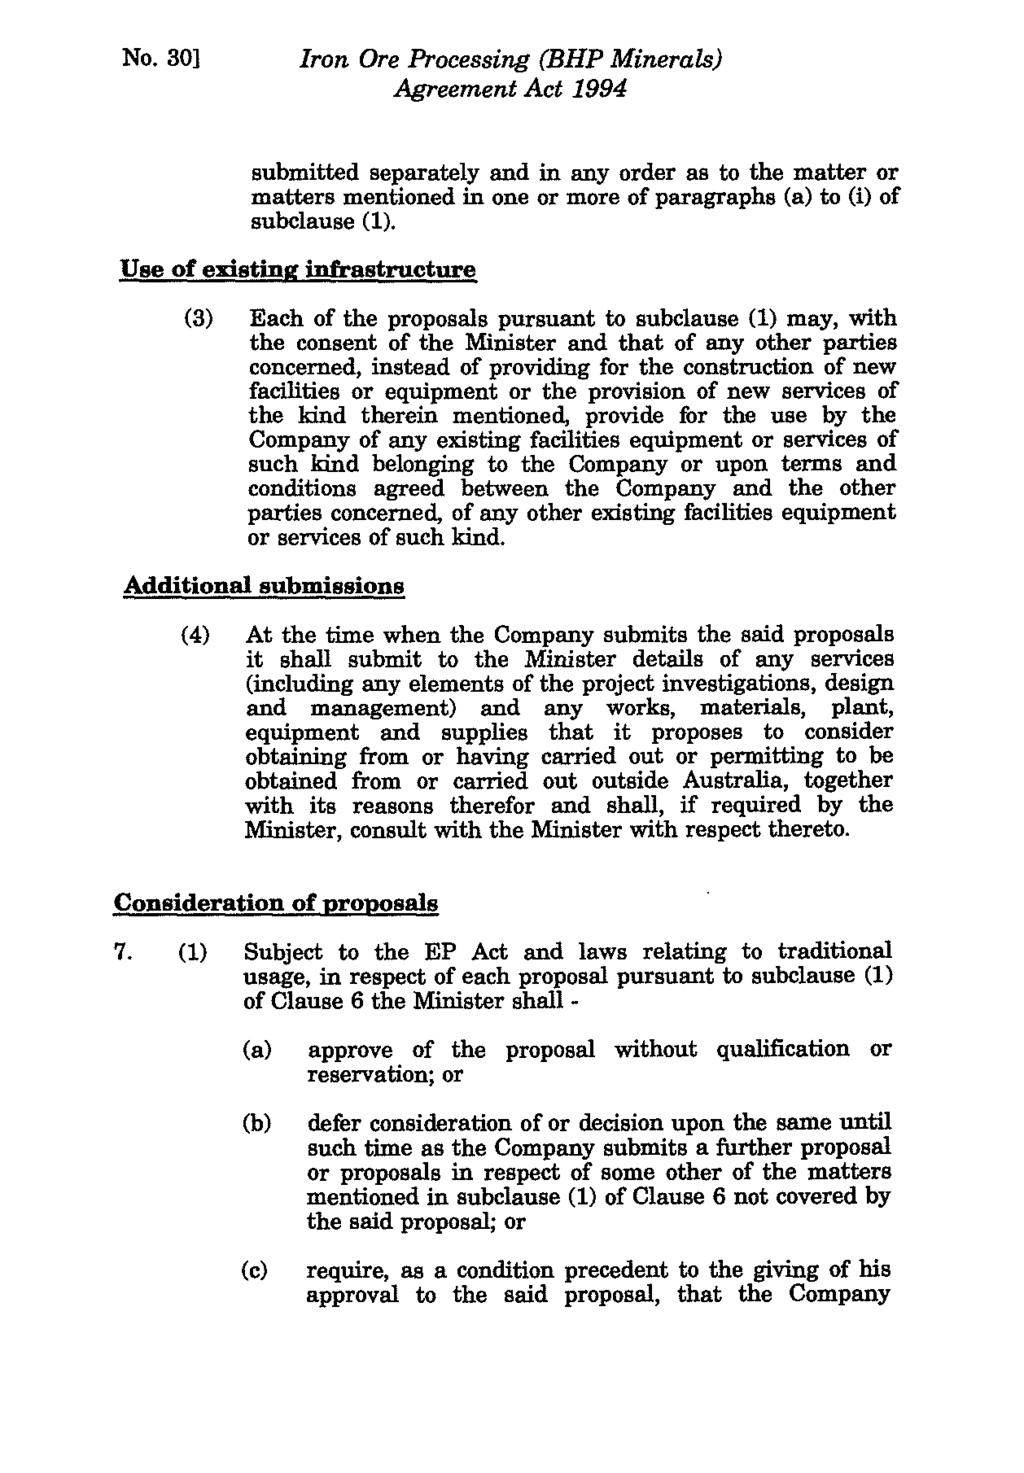 No. 30] Iron Ore Processing (BHP Minerals) submitted separately and in any order as to the matter or matters mentioned in one or more of paragraphs (a) to (i) of subclause (1).